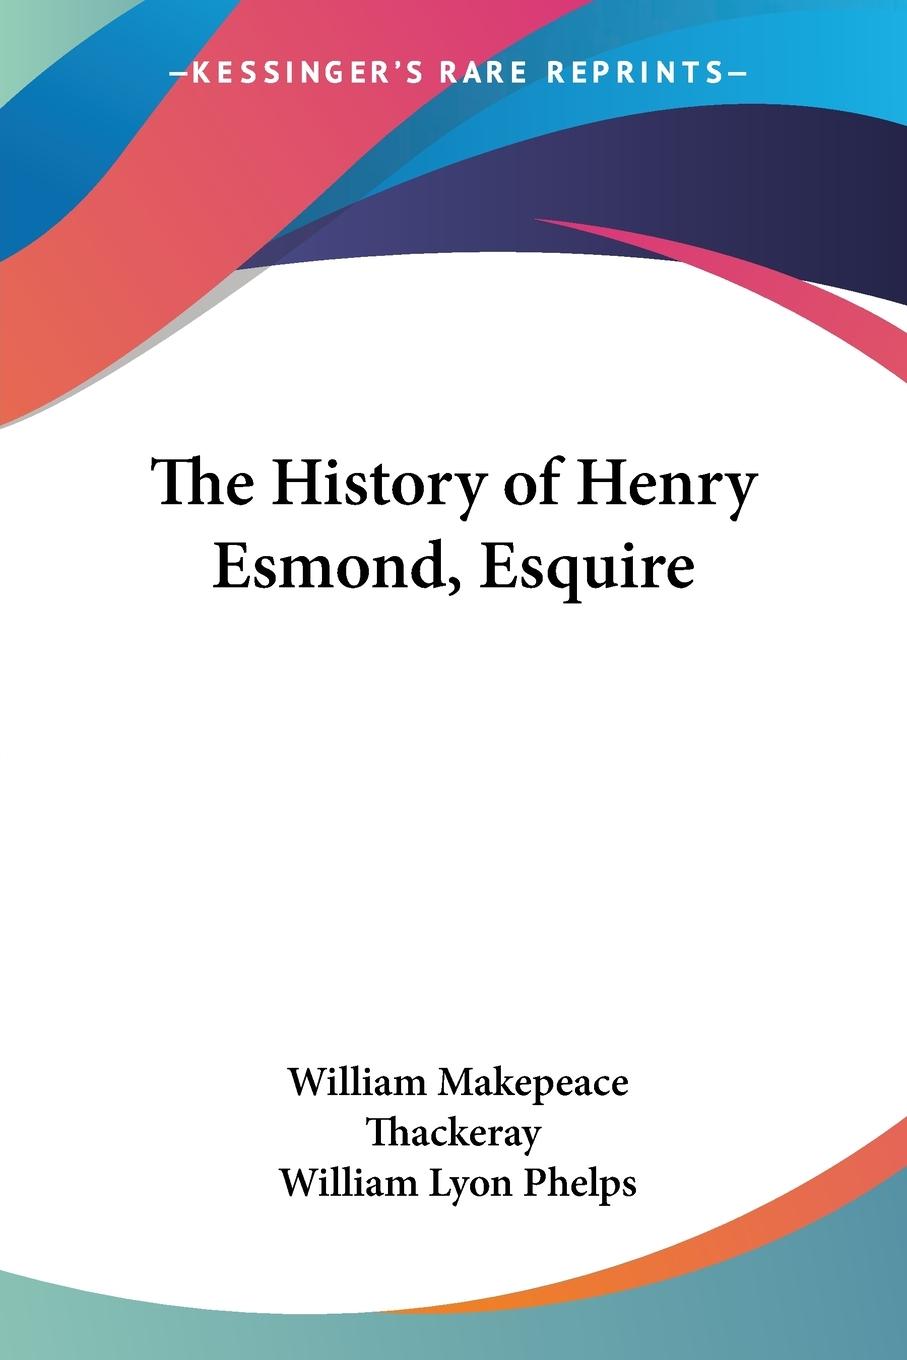 The History of Henry Esmond, Esquire - Thackeray, William Makepeace